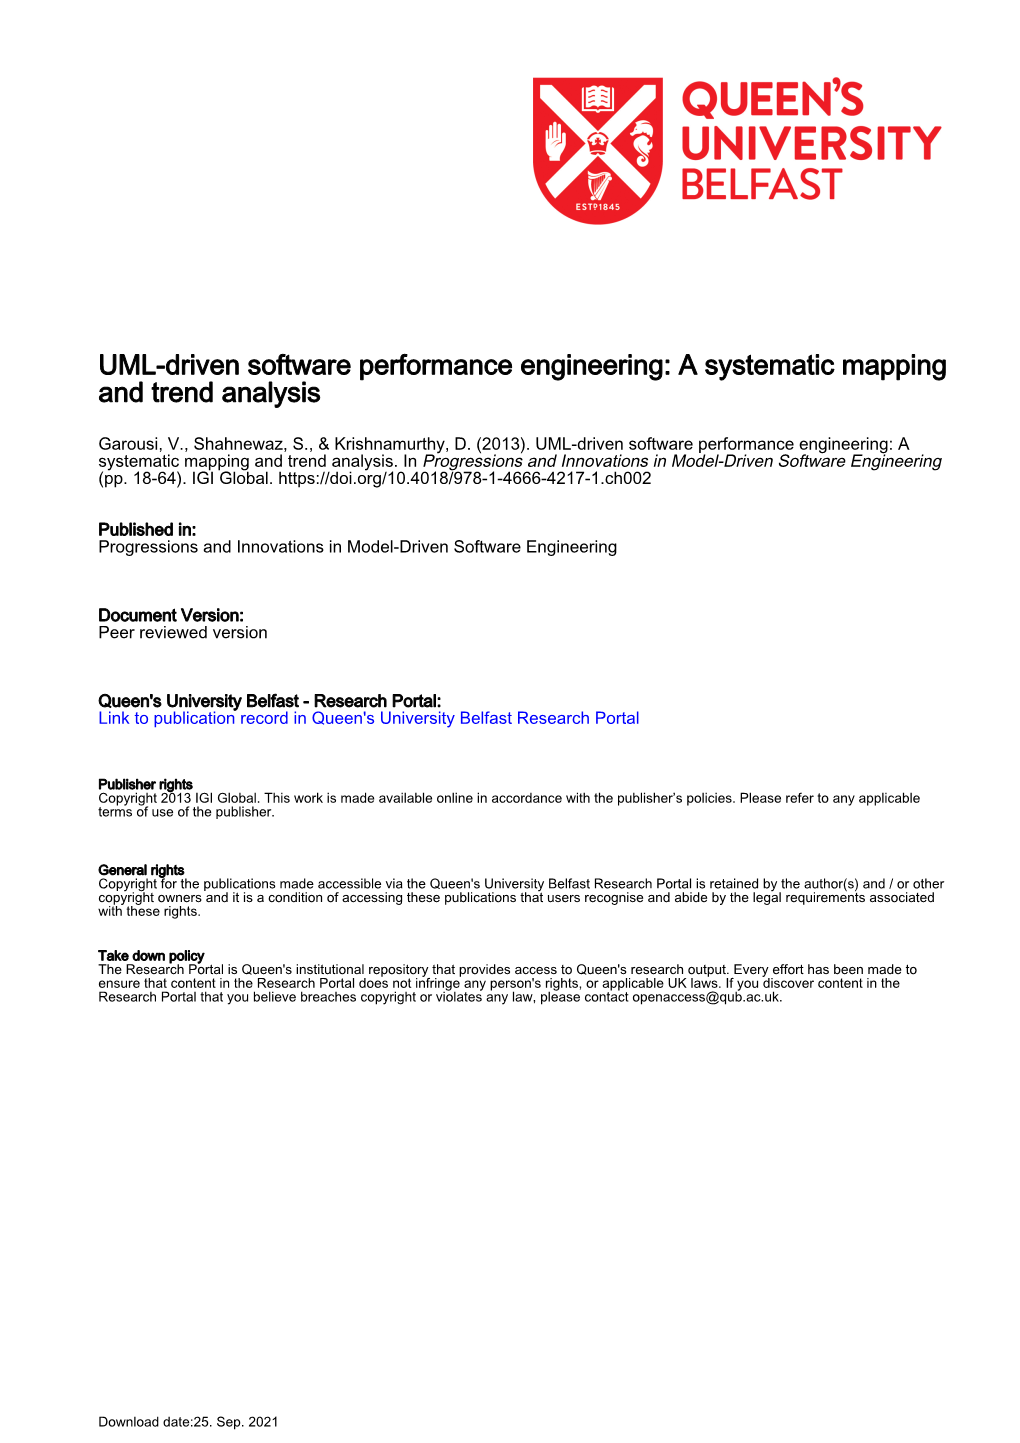 UML-Driven Software Performance Engineering: a Systematic Mapping and Trend Analysis